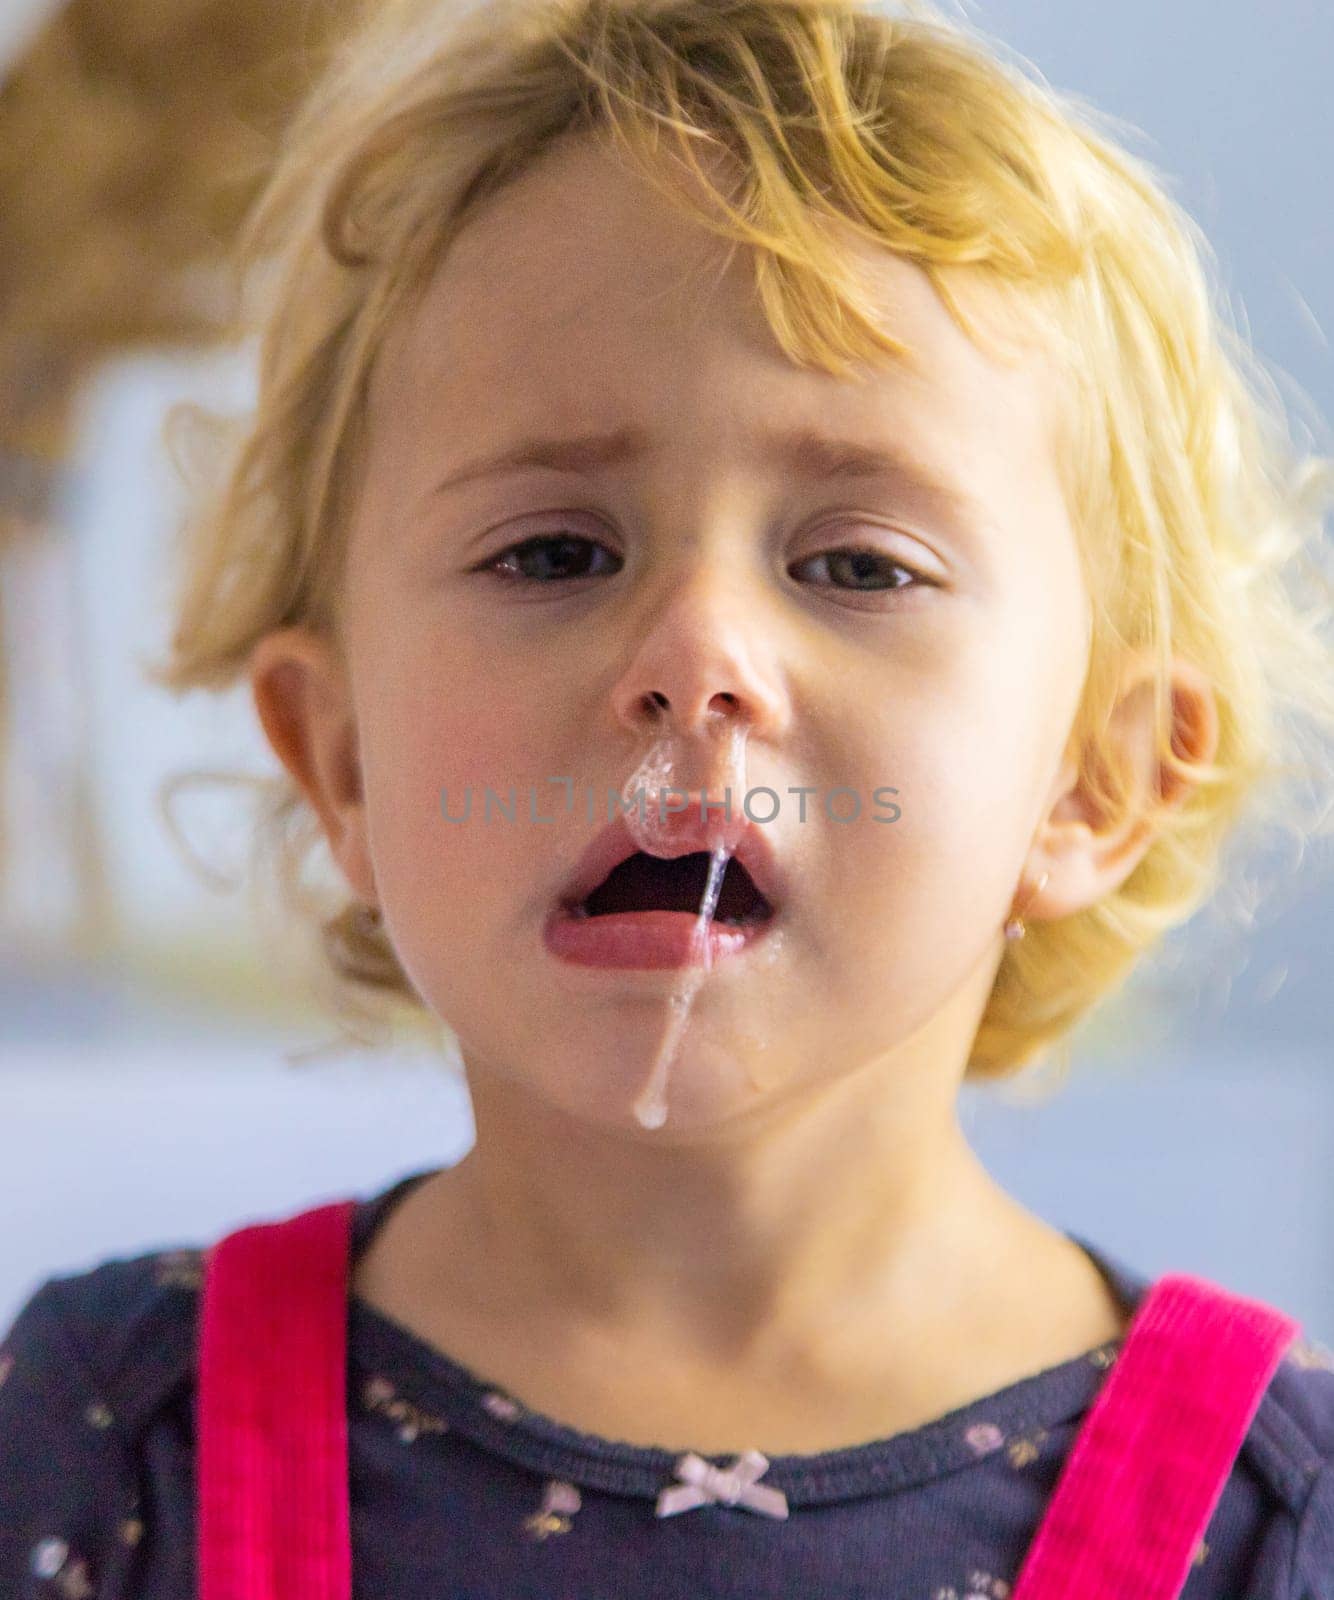 The child has snot, the child is crying. selective focus. by yanadjana